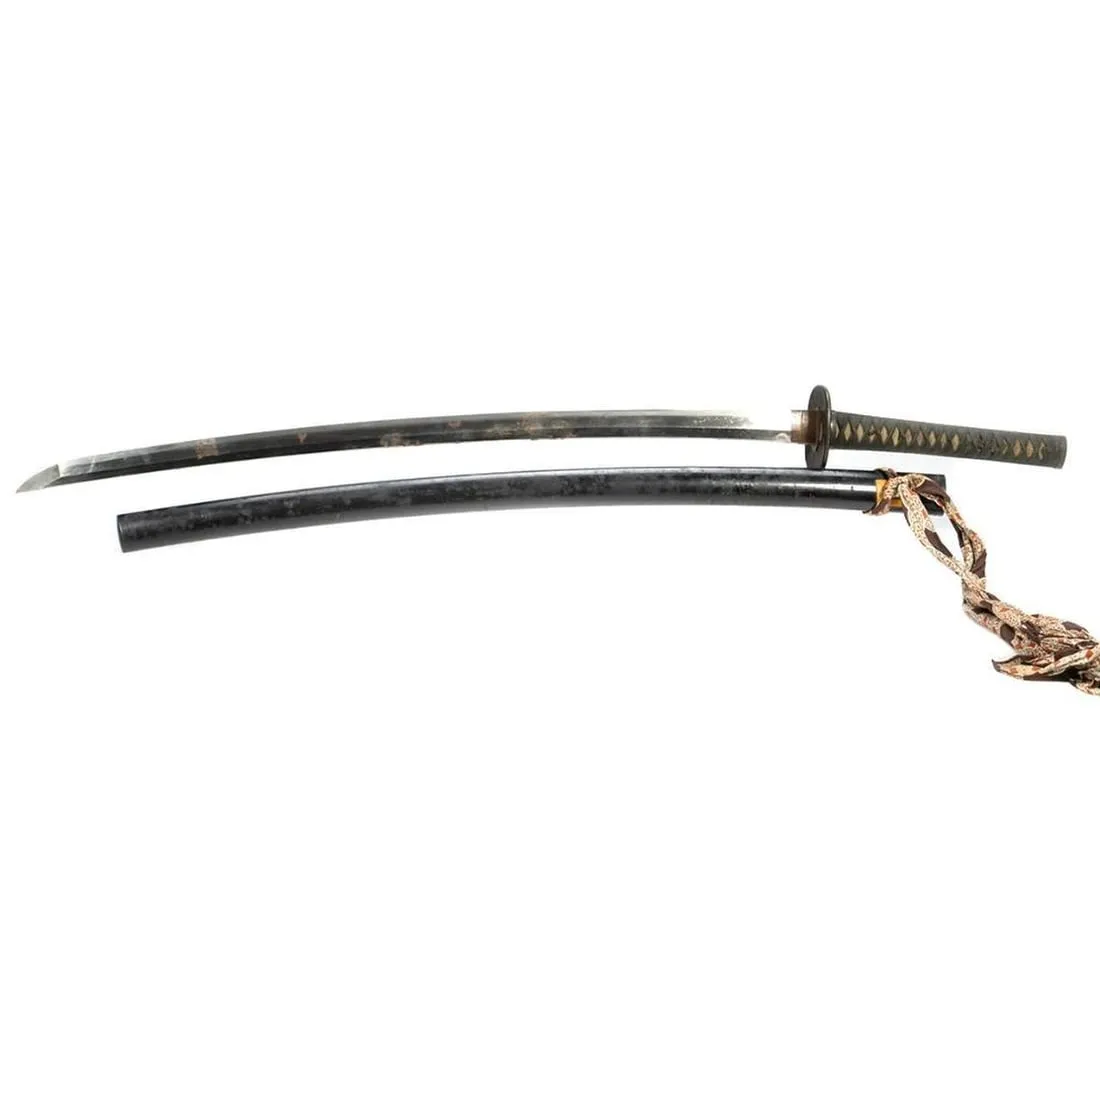 A sword with a scabbardDescription automatically generated